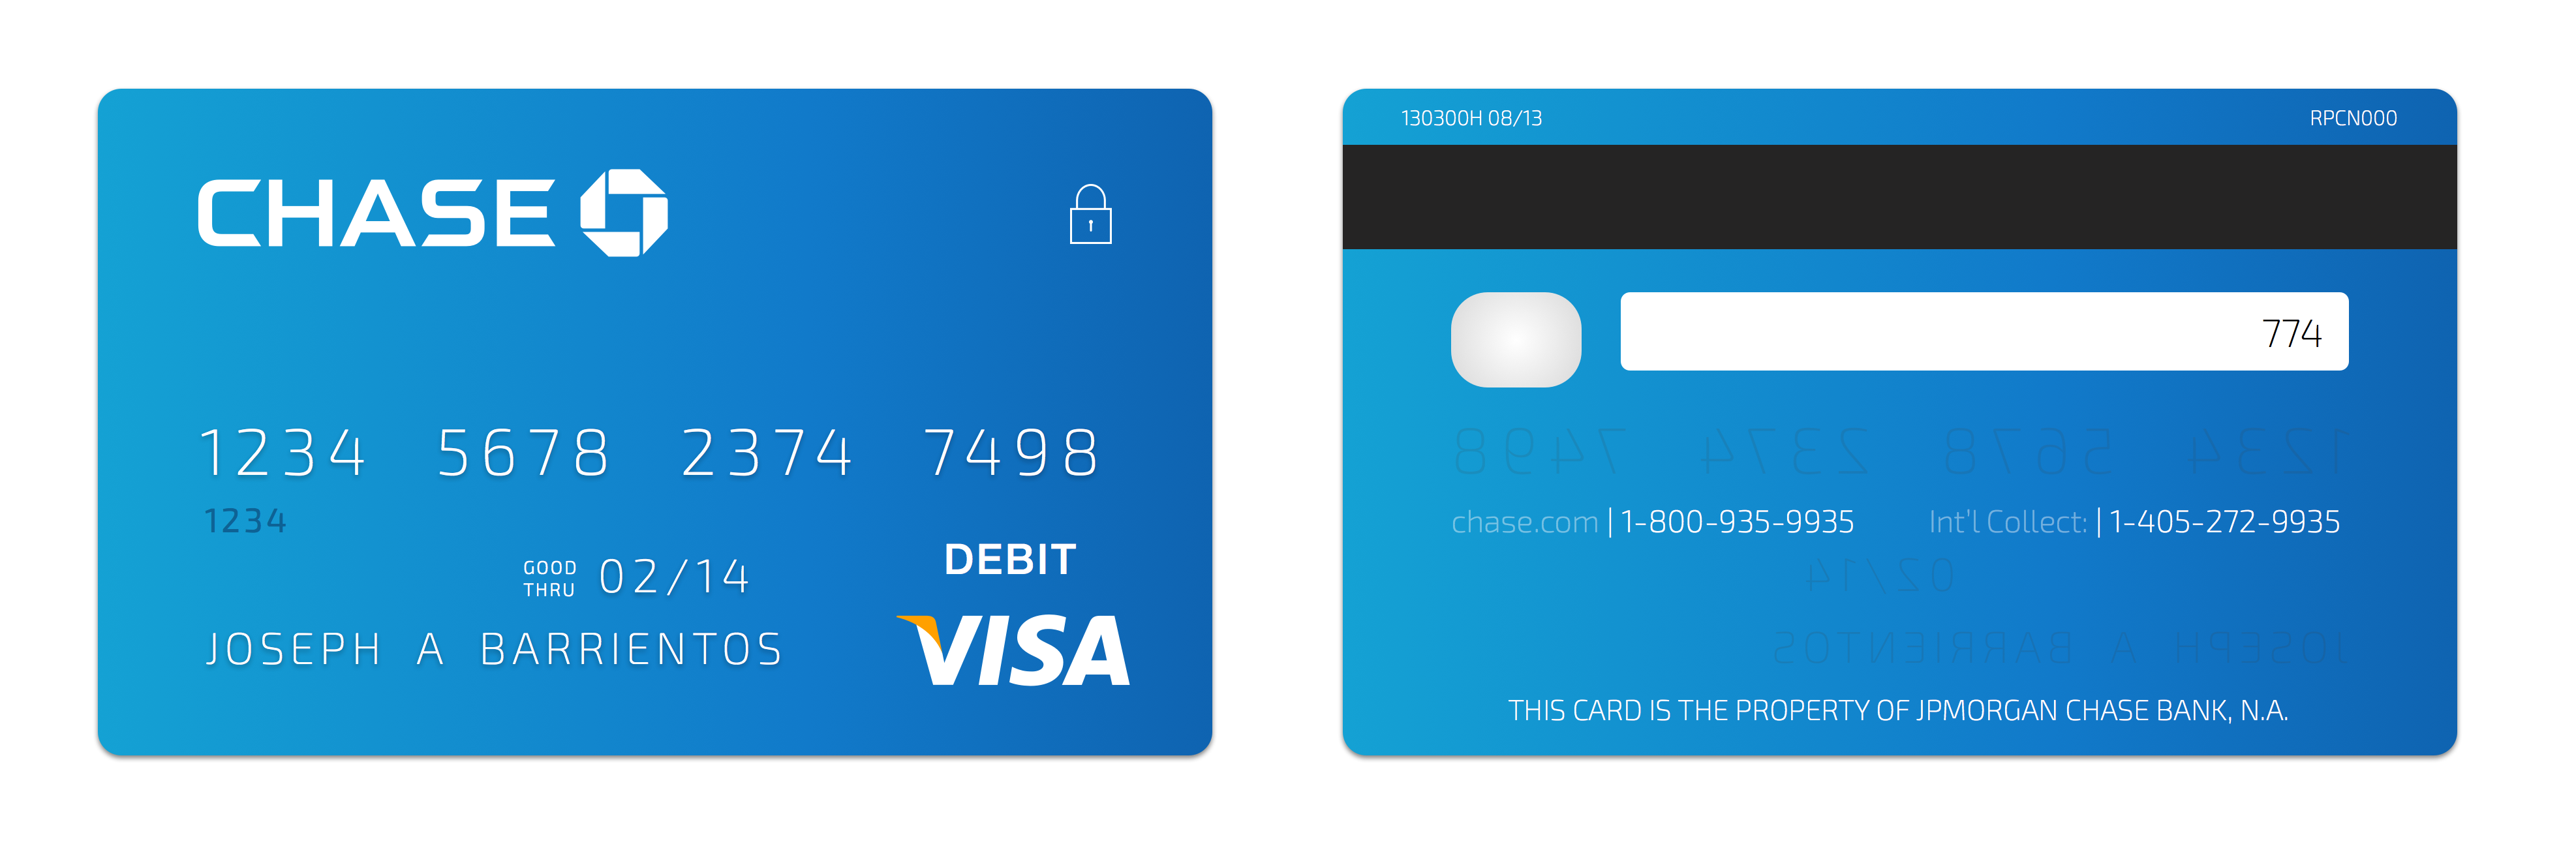 chase bank visa cryptocurrency